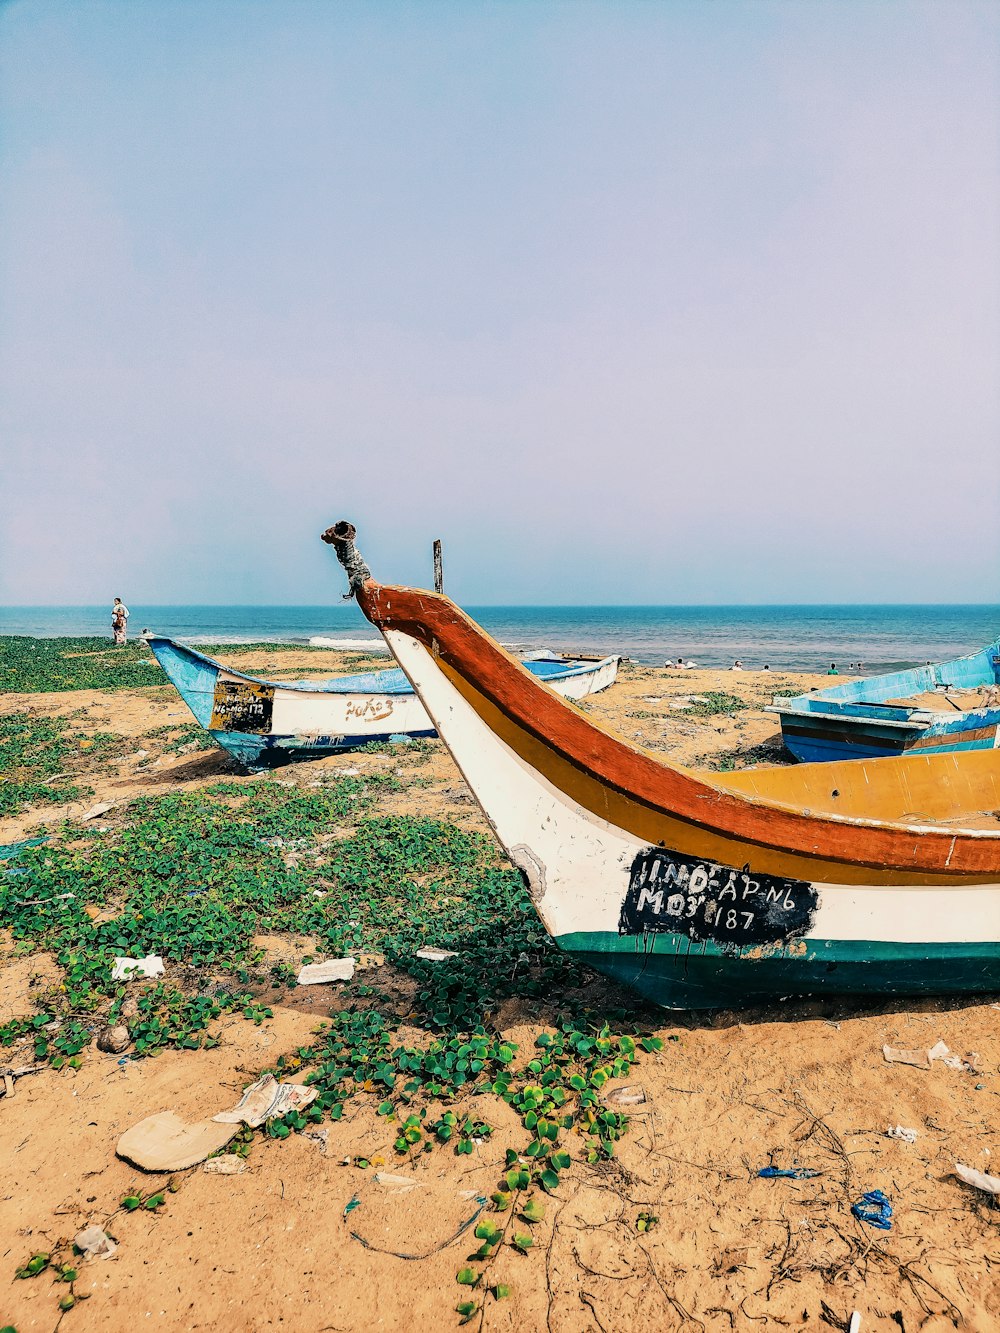 a group of boats sitting on top of a sandy beach